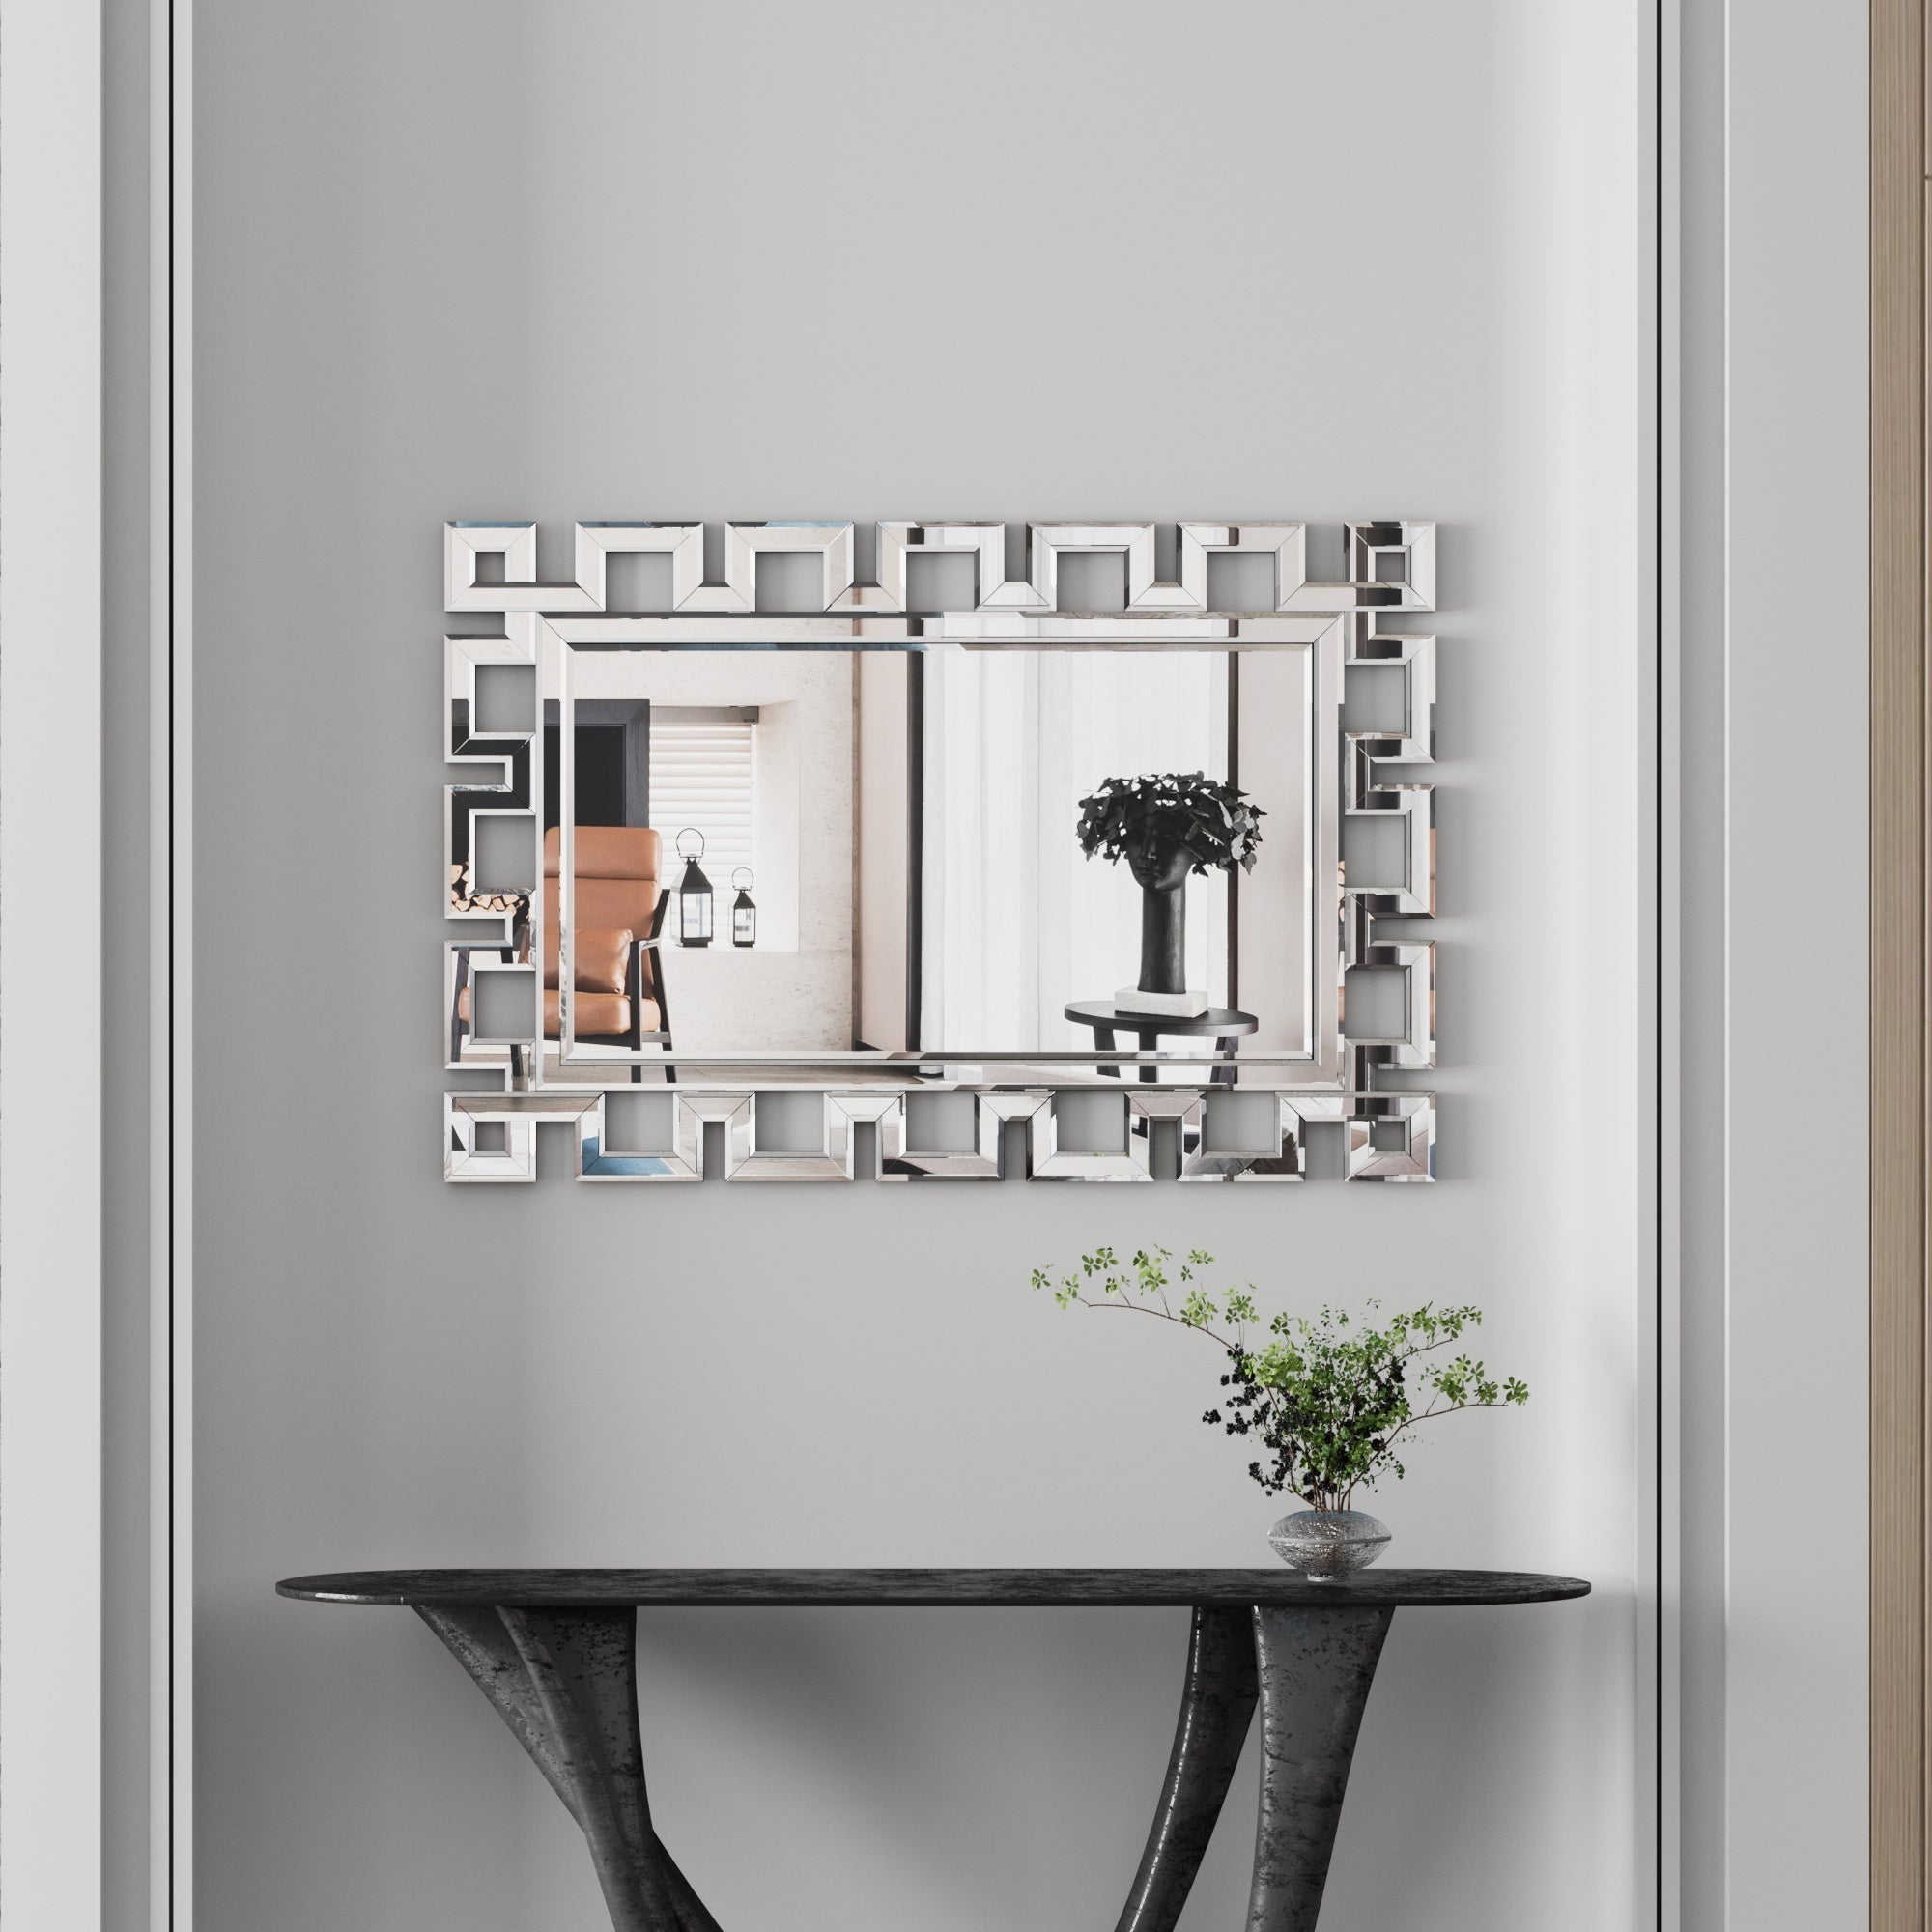 36" x 24" Rectangle Decorative Accent Wall Mirror